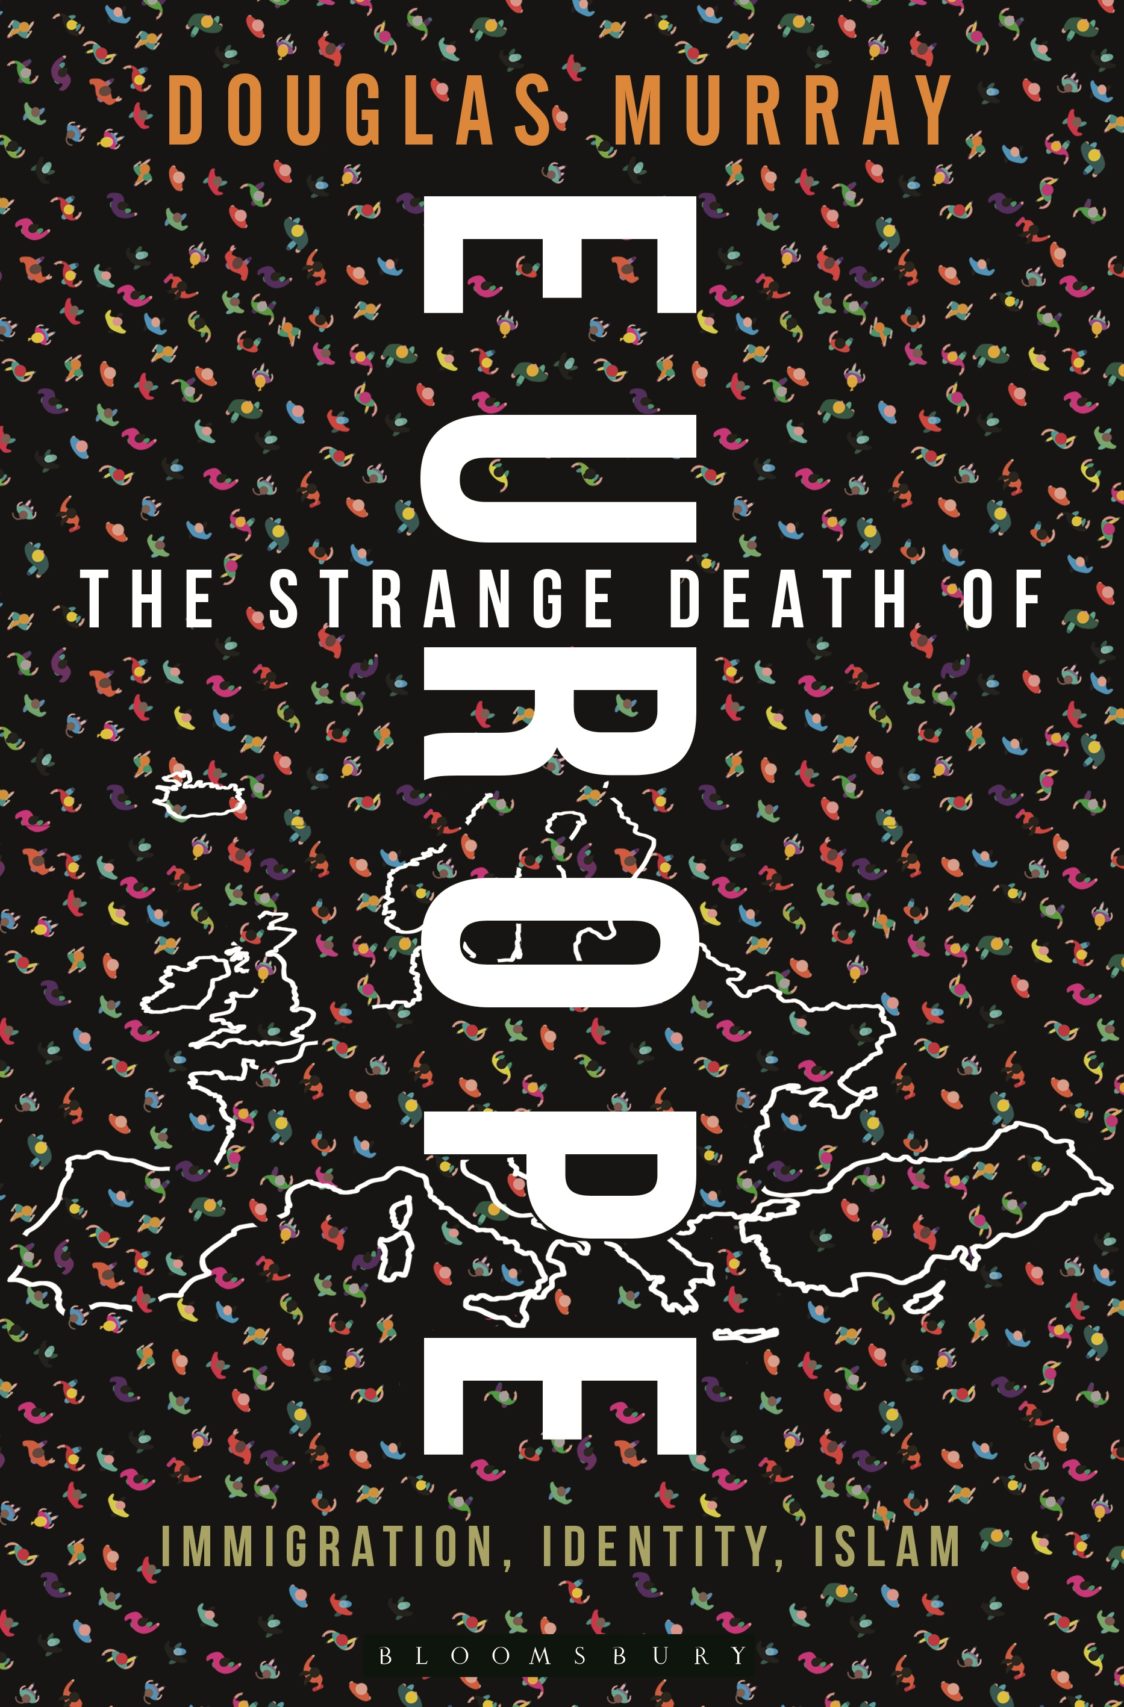 The Strange Death of Europe by Douglas Murray